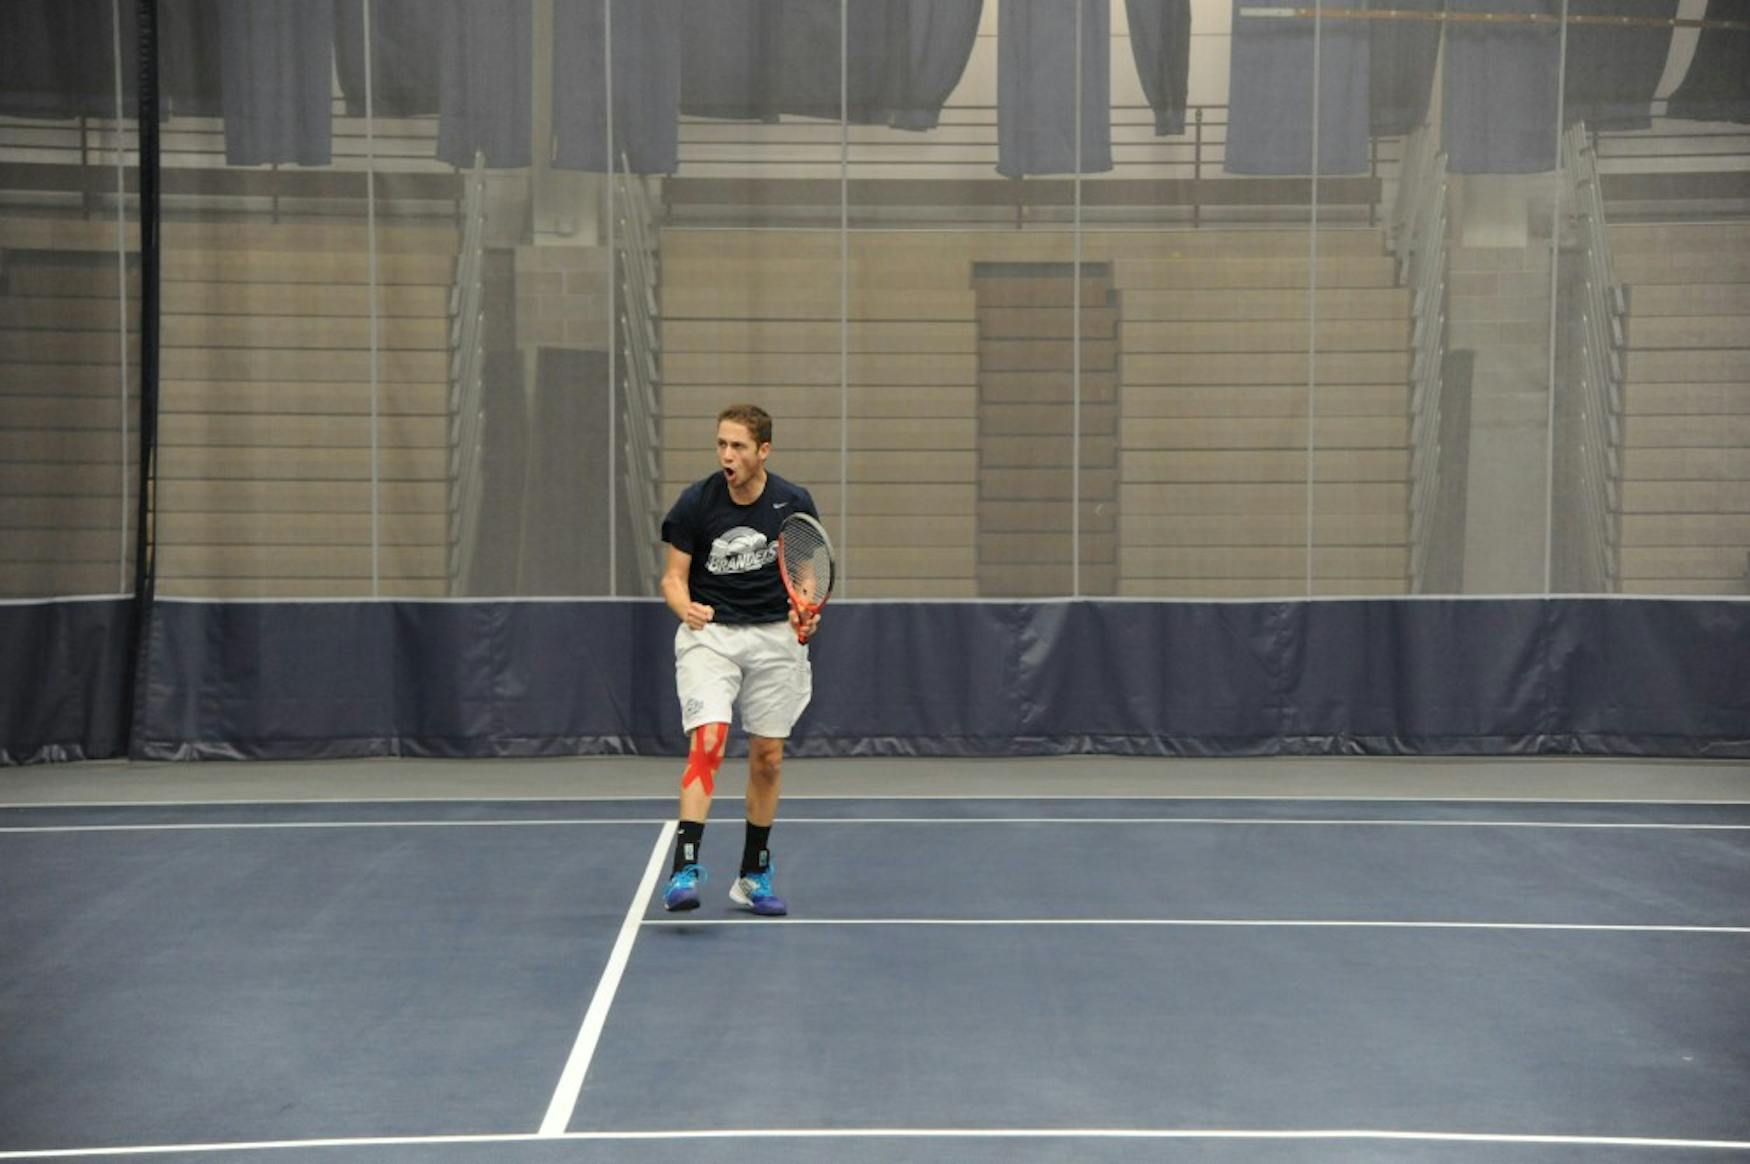 TOP SPIN: Danny Lubarsky ’16 wins a point during his match against the Coast Guard Bears this past Saturday at home.